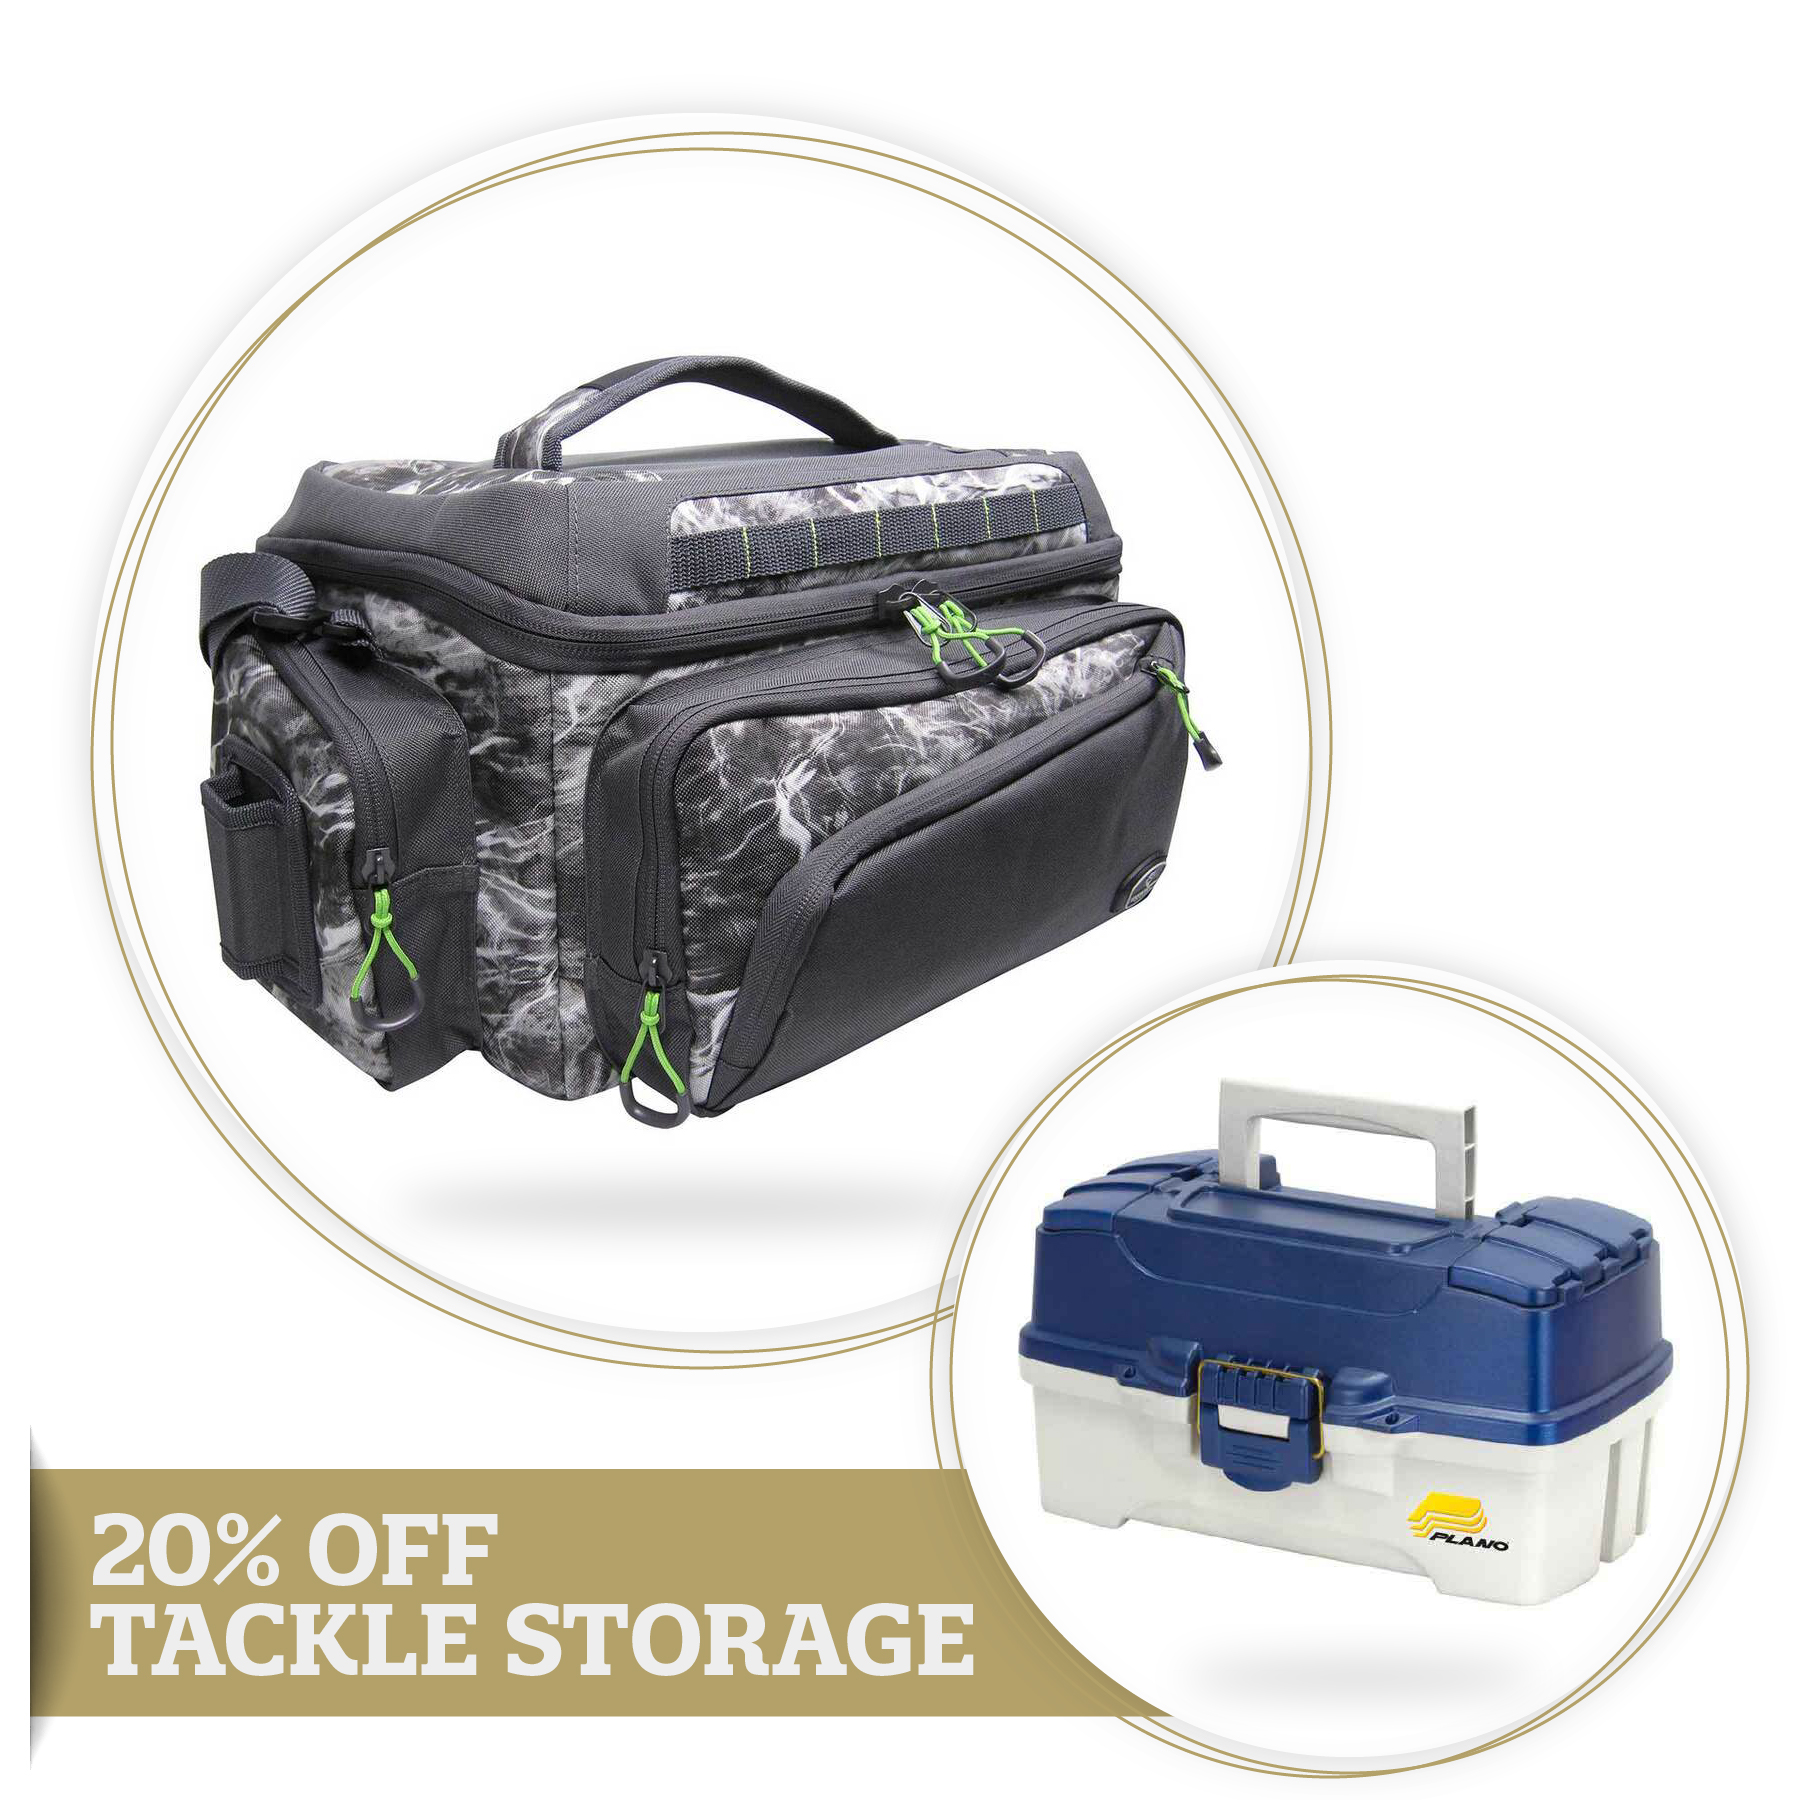 20% Off Tackle Storage